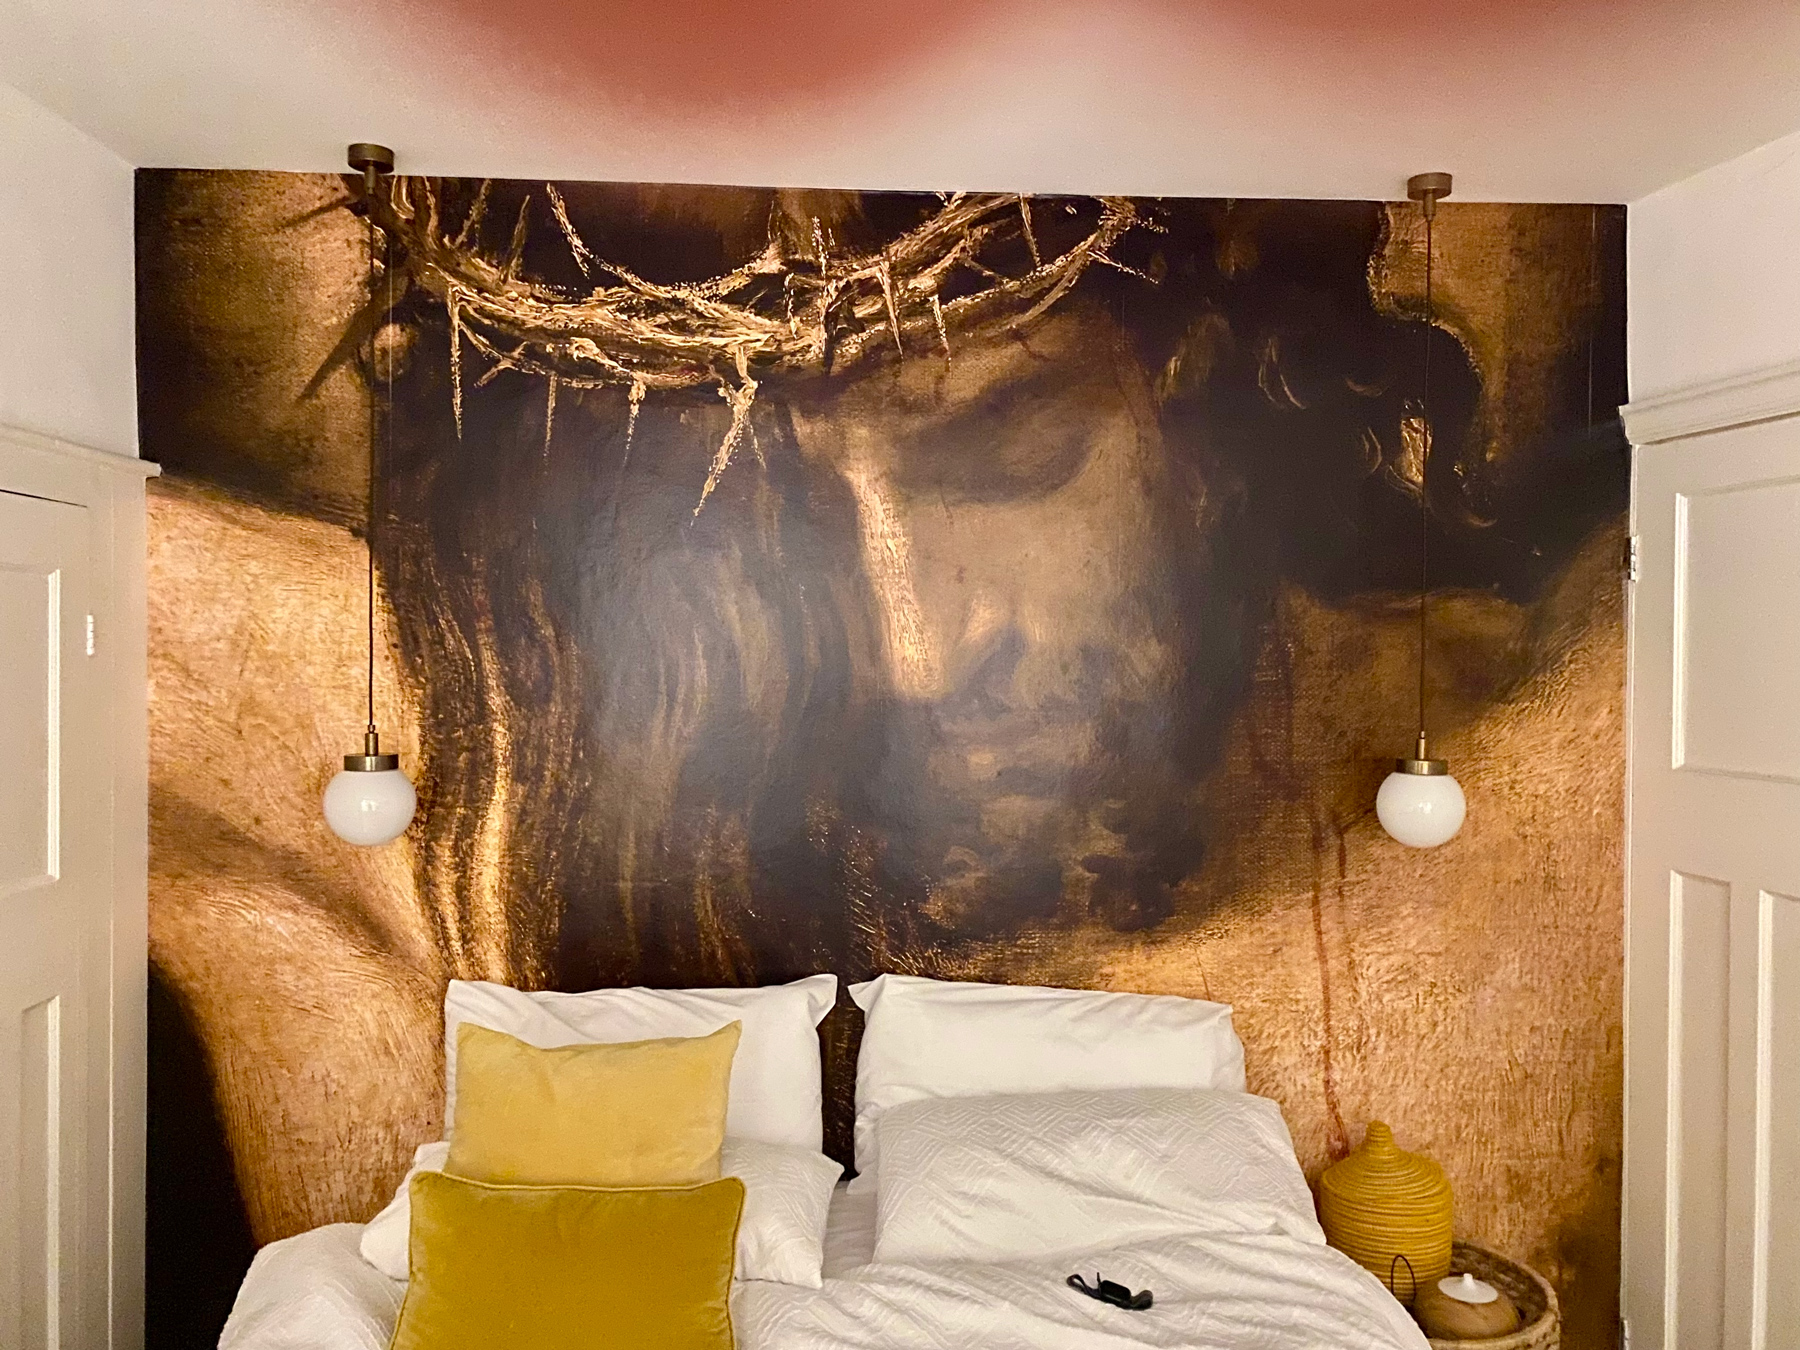 A full-wall mural of a crucified Jesus in a crown of thorns, looking down on a double bed